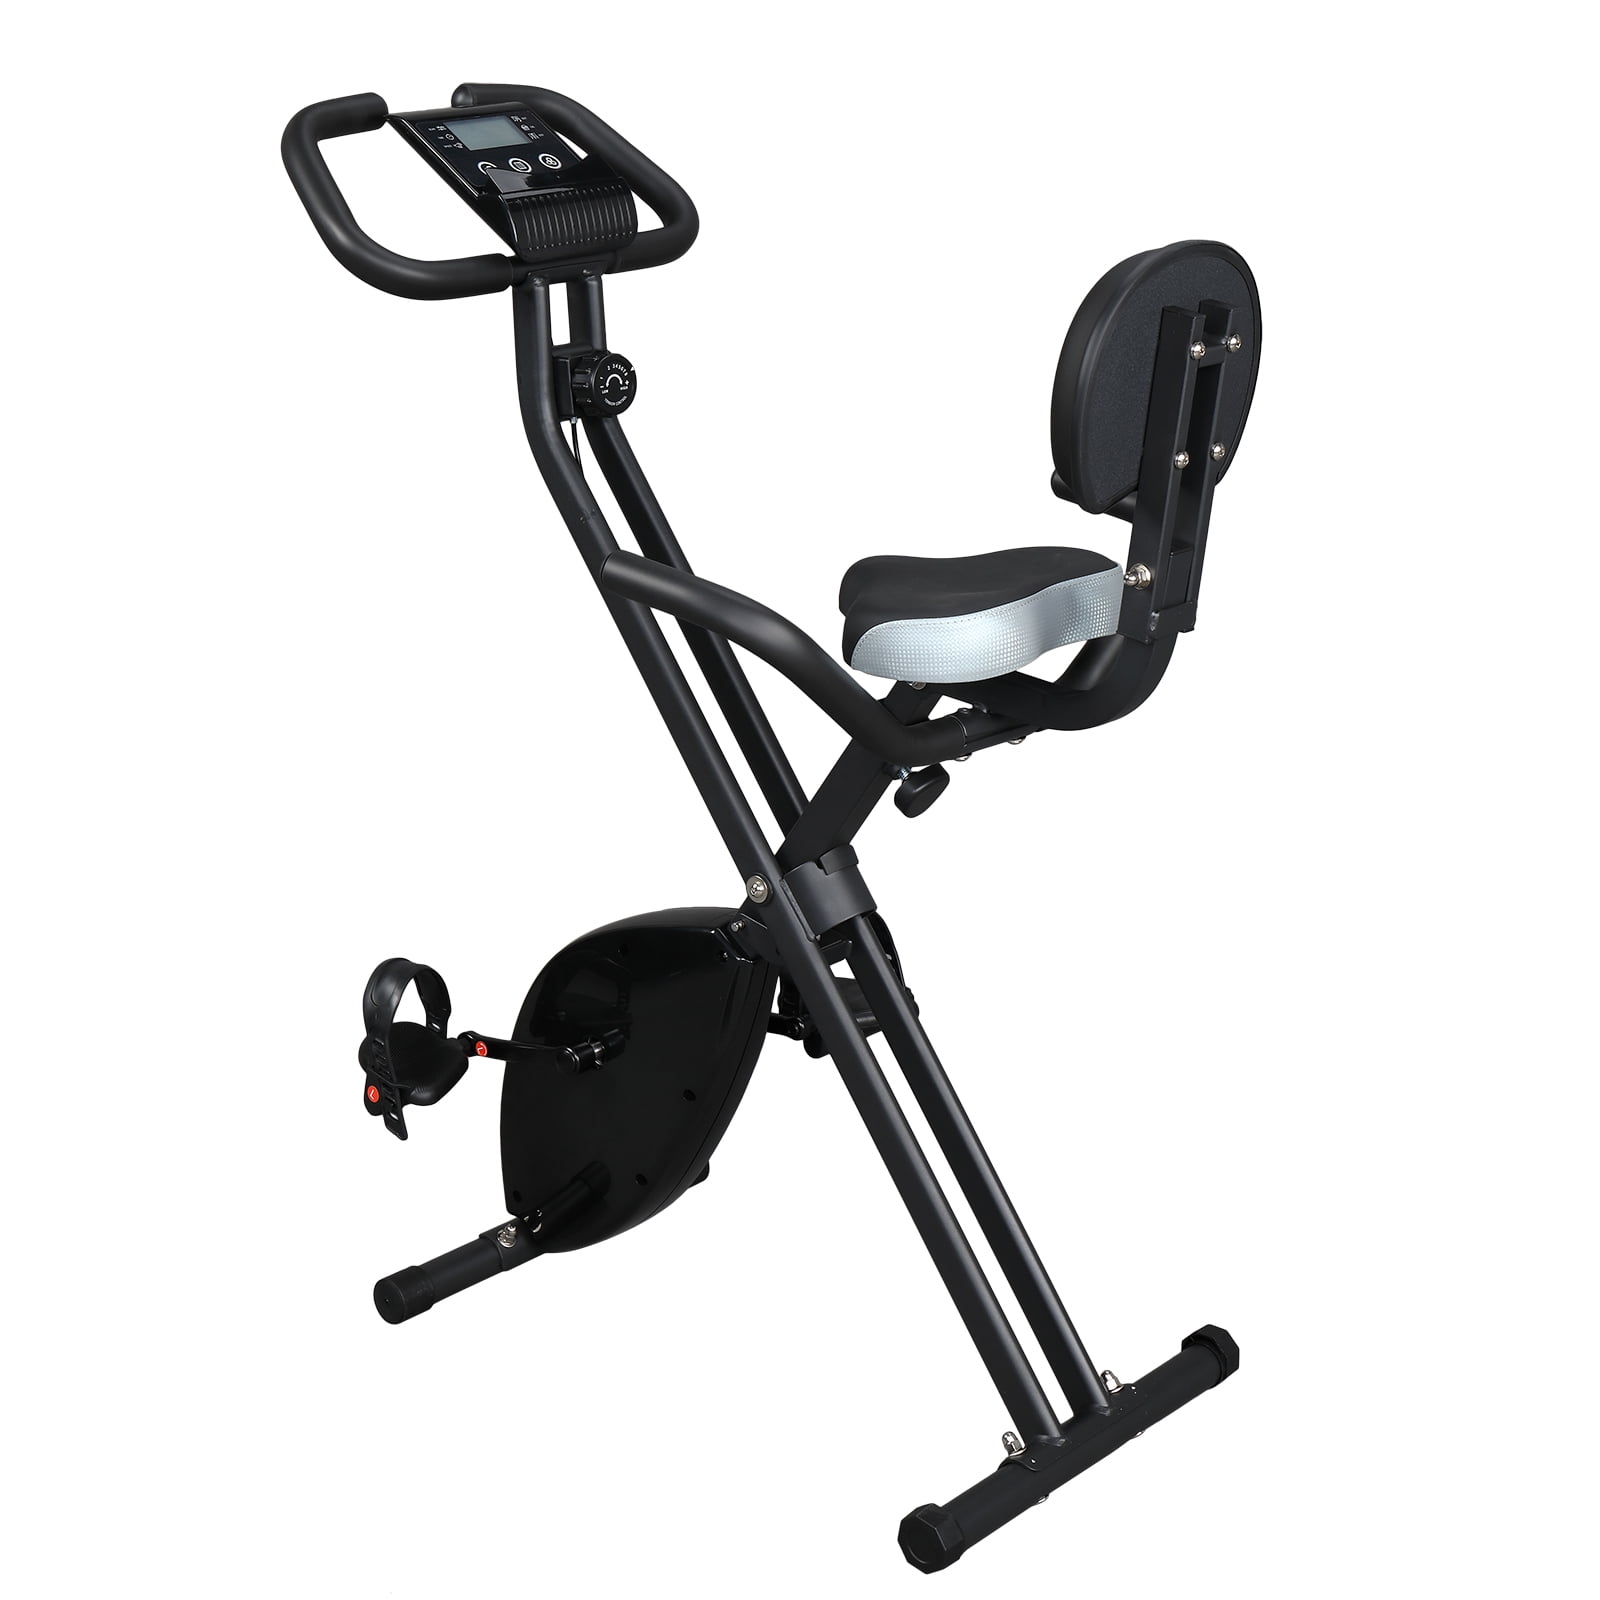 Details about   Folding Exercise Bike Magnetic Control Flywheel Stationary Bike w Exercise Meter 